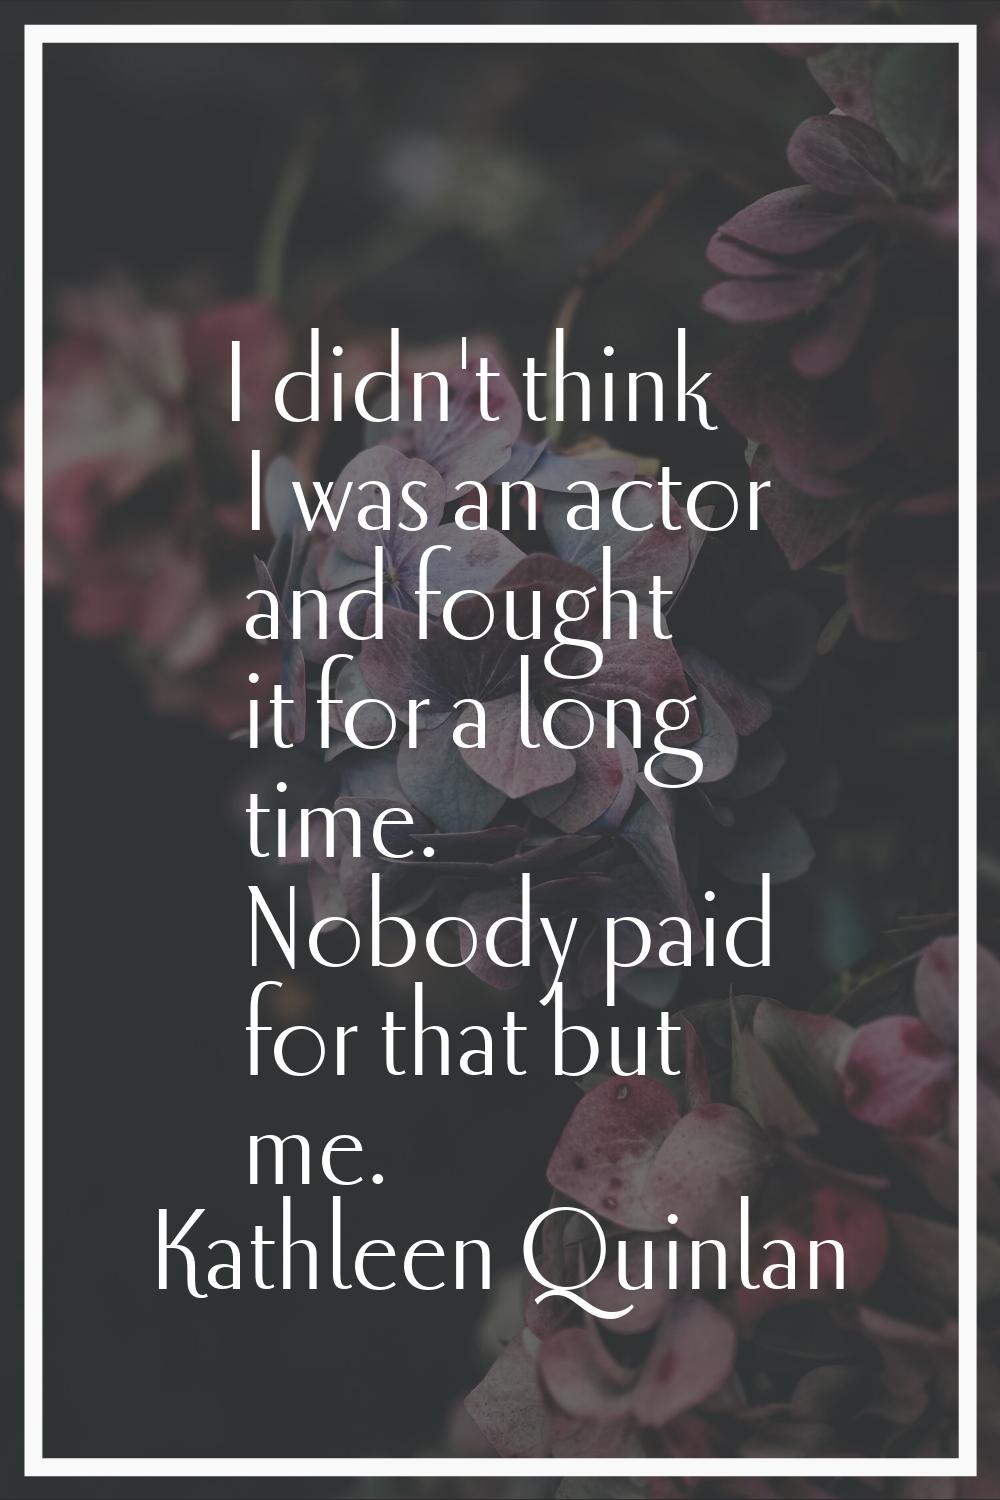 I didn't think I was an actor and fought it for a long time. Nobody paid for that but me.